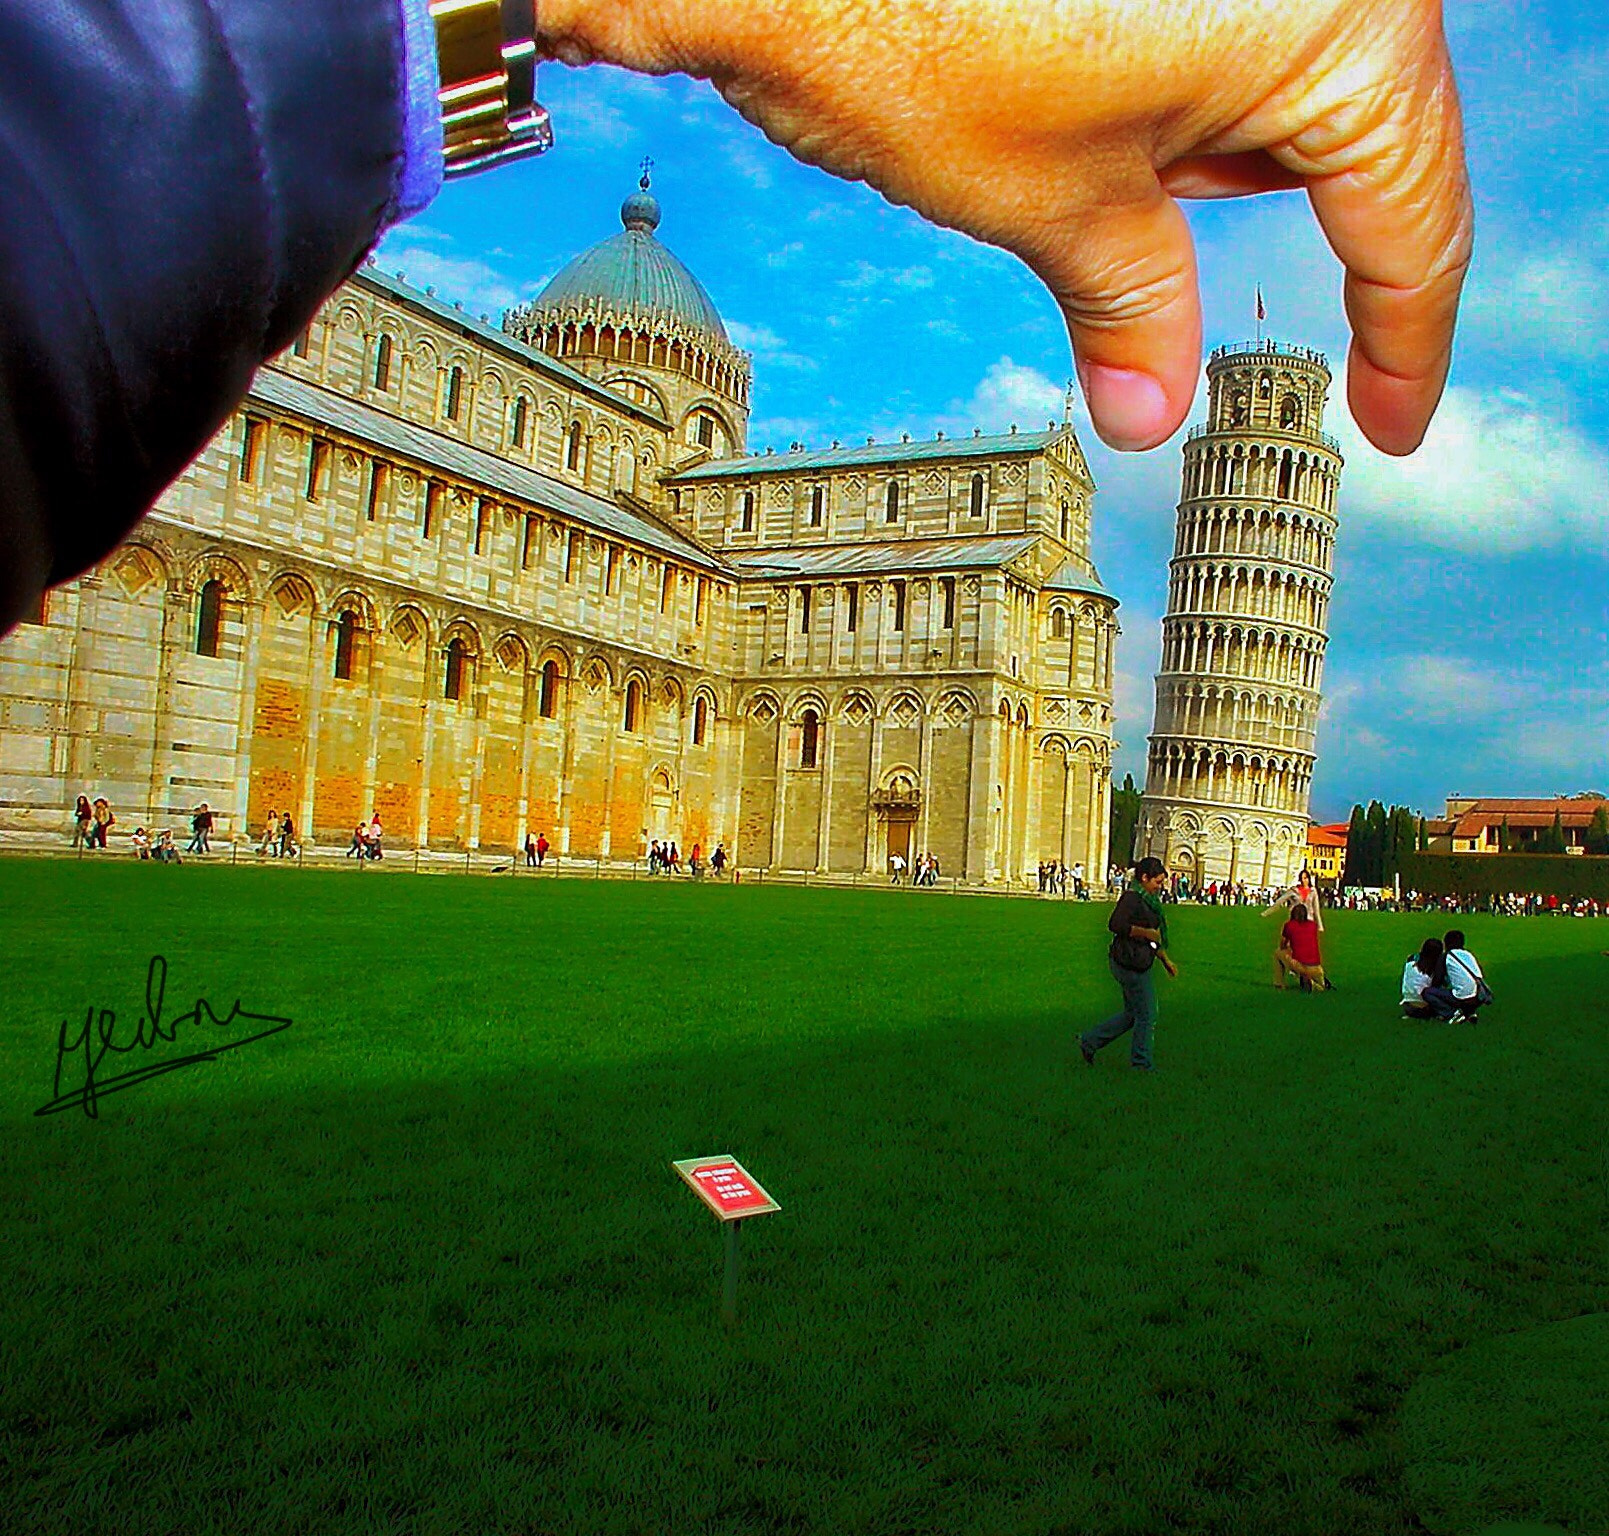 Nikon E880 sample photo. Move the tower to g4 in pisa photography